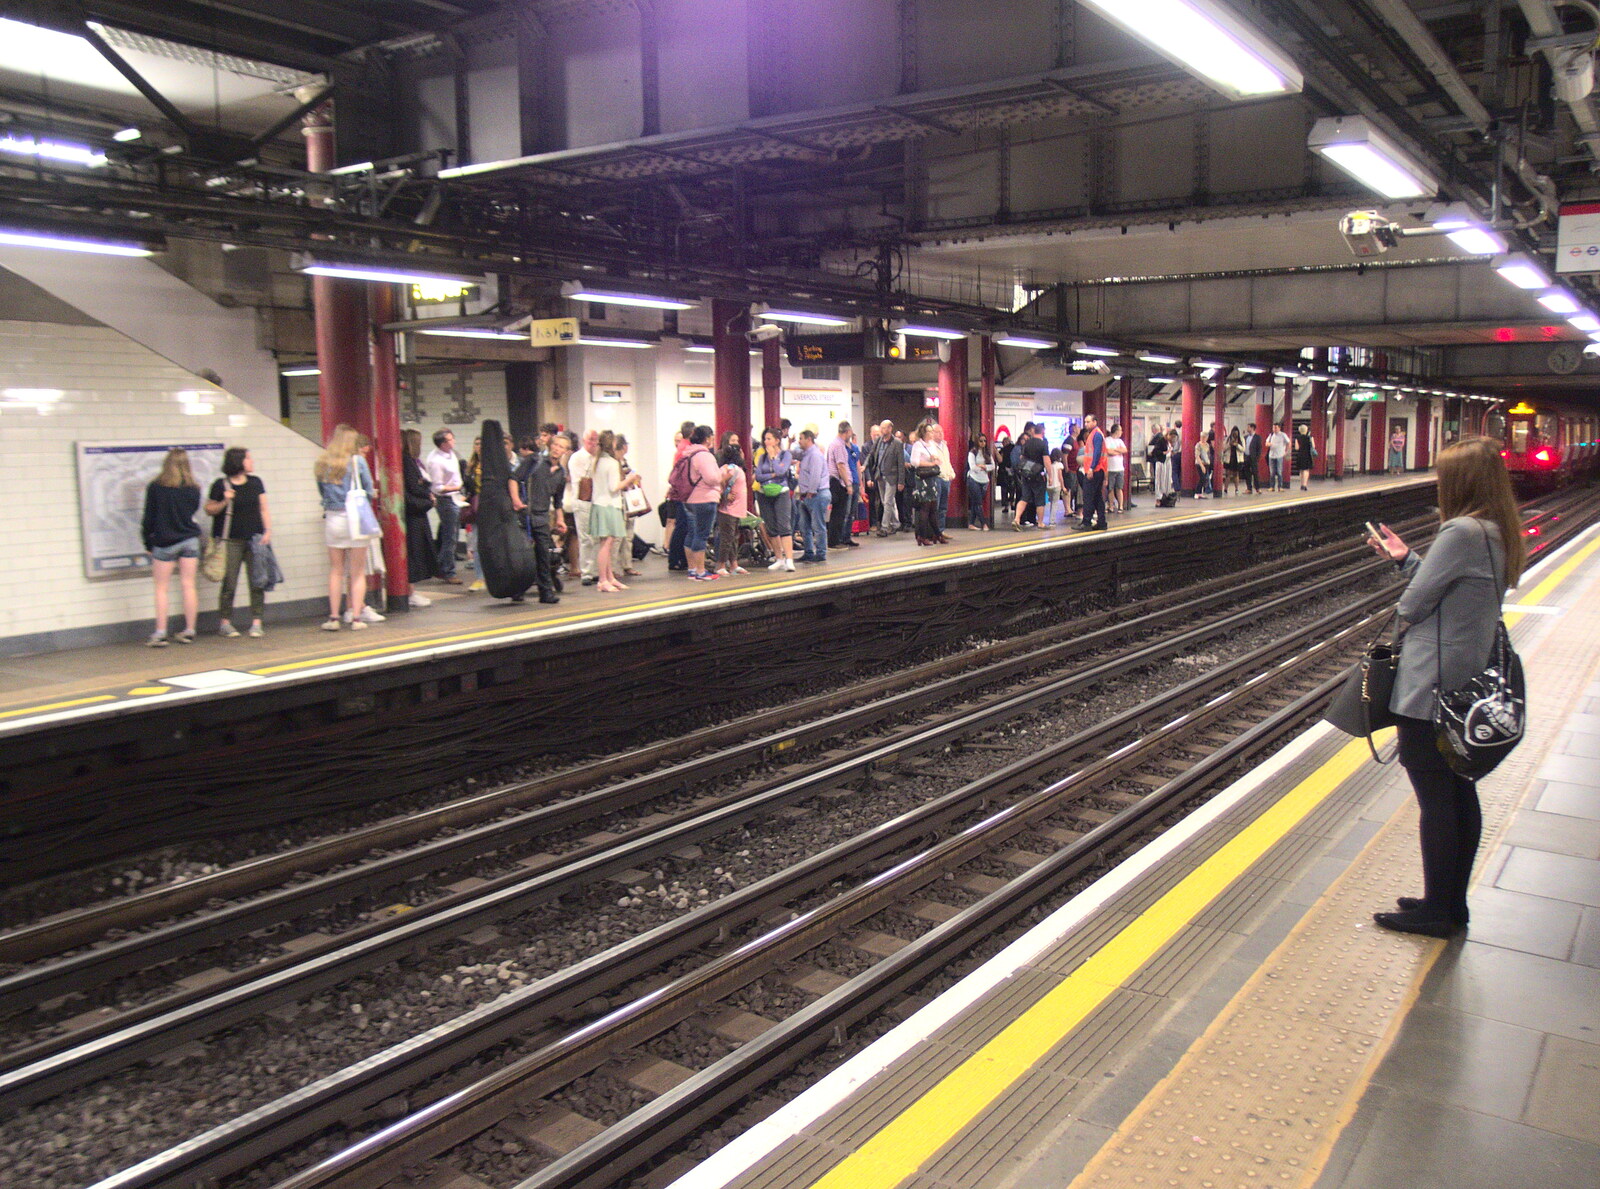 Crowds on the underground platform from A SwiftKey Lunch, Porchester Place,  Edgware Road, London - 27th June 2018